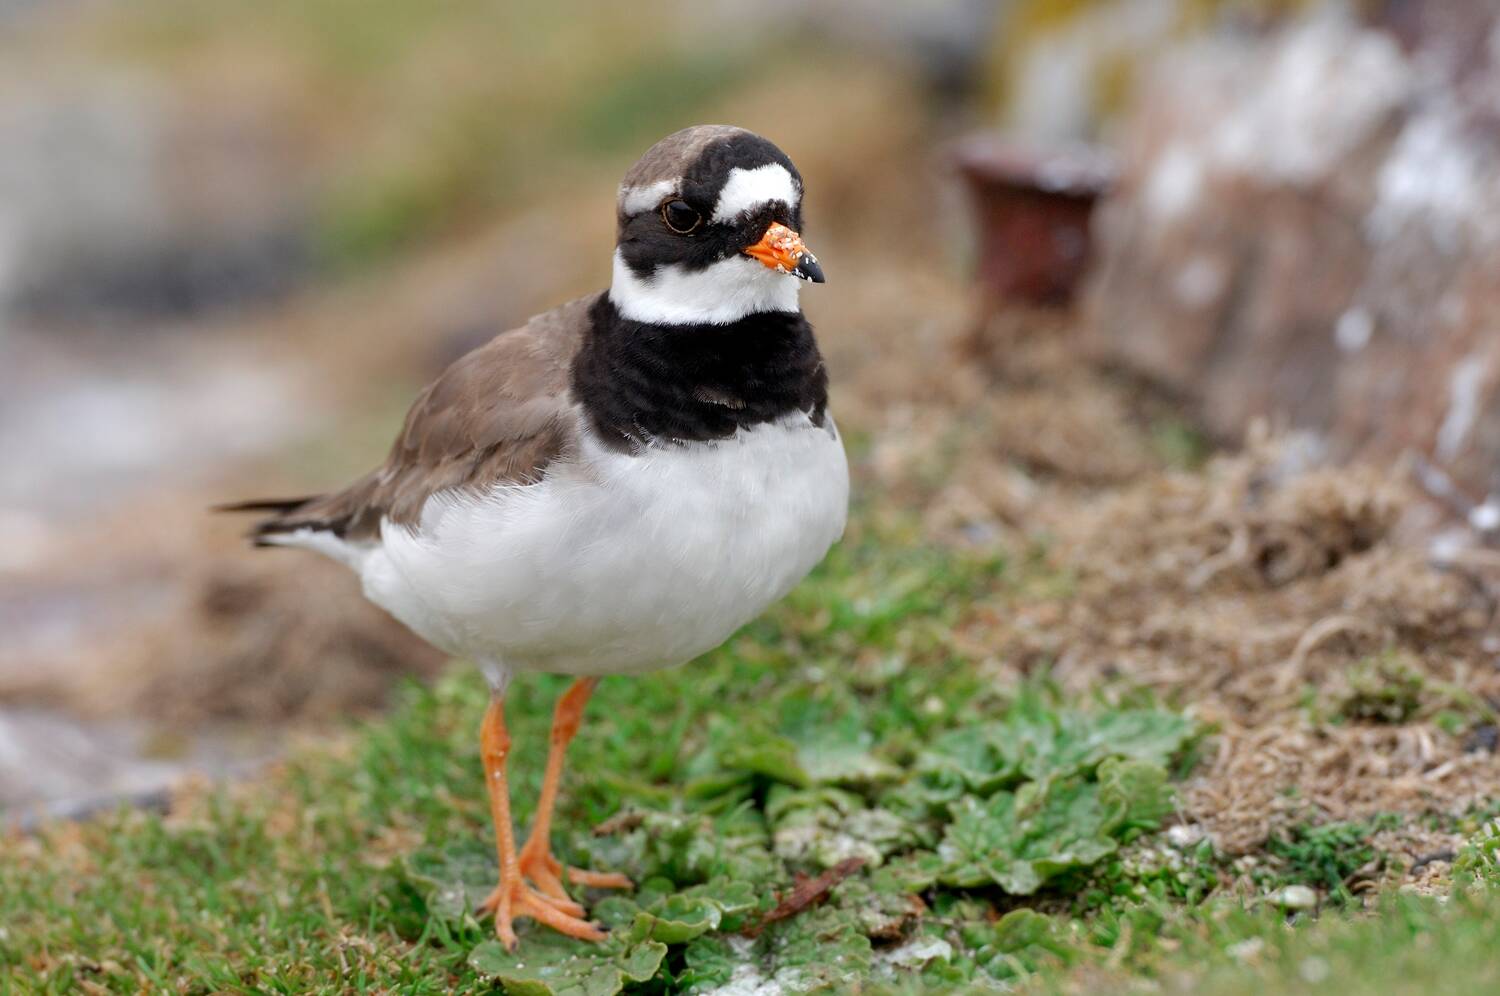 A small bird faces the camera, standing on small green plants by some rocks. It has a black and white head and neck, with a brown back and white tummy. It also has orange legs.